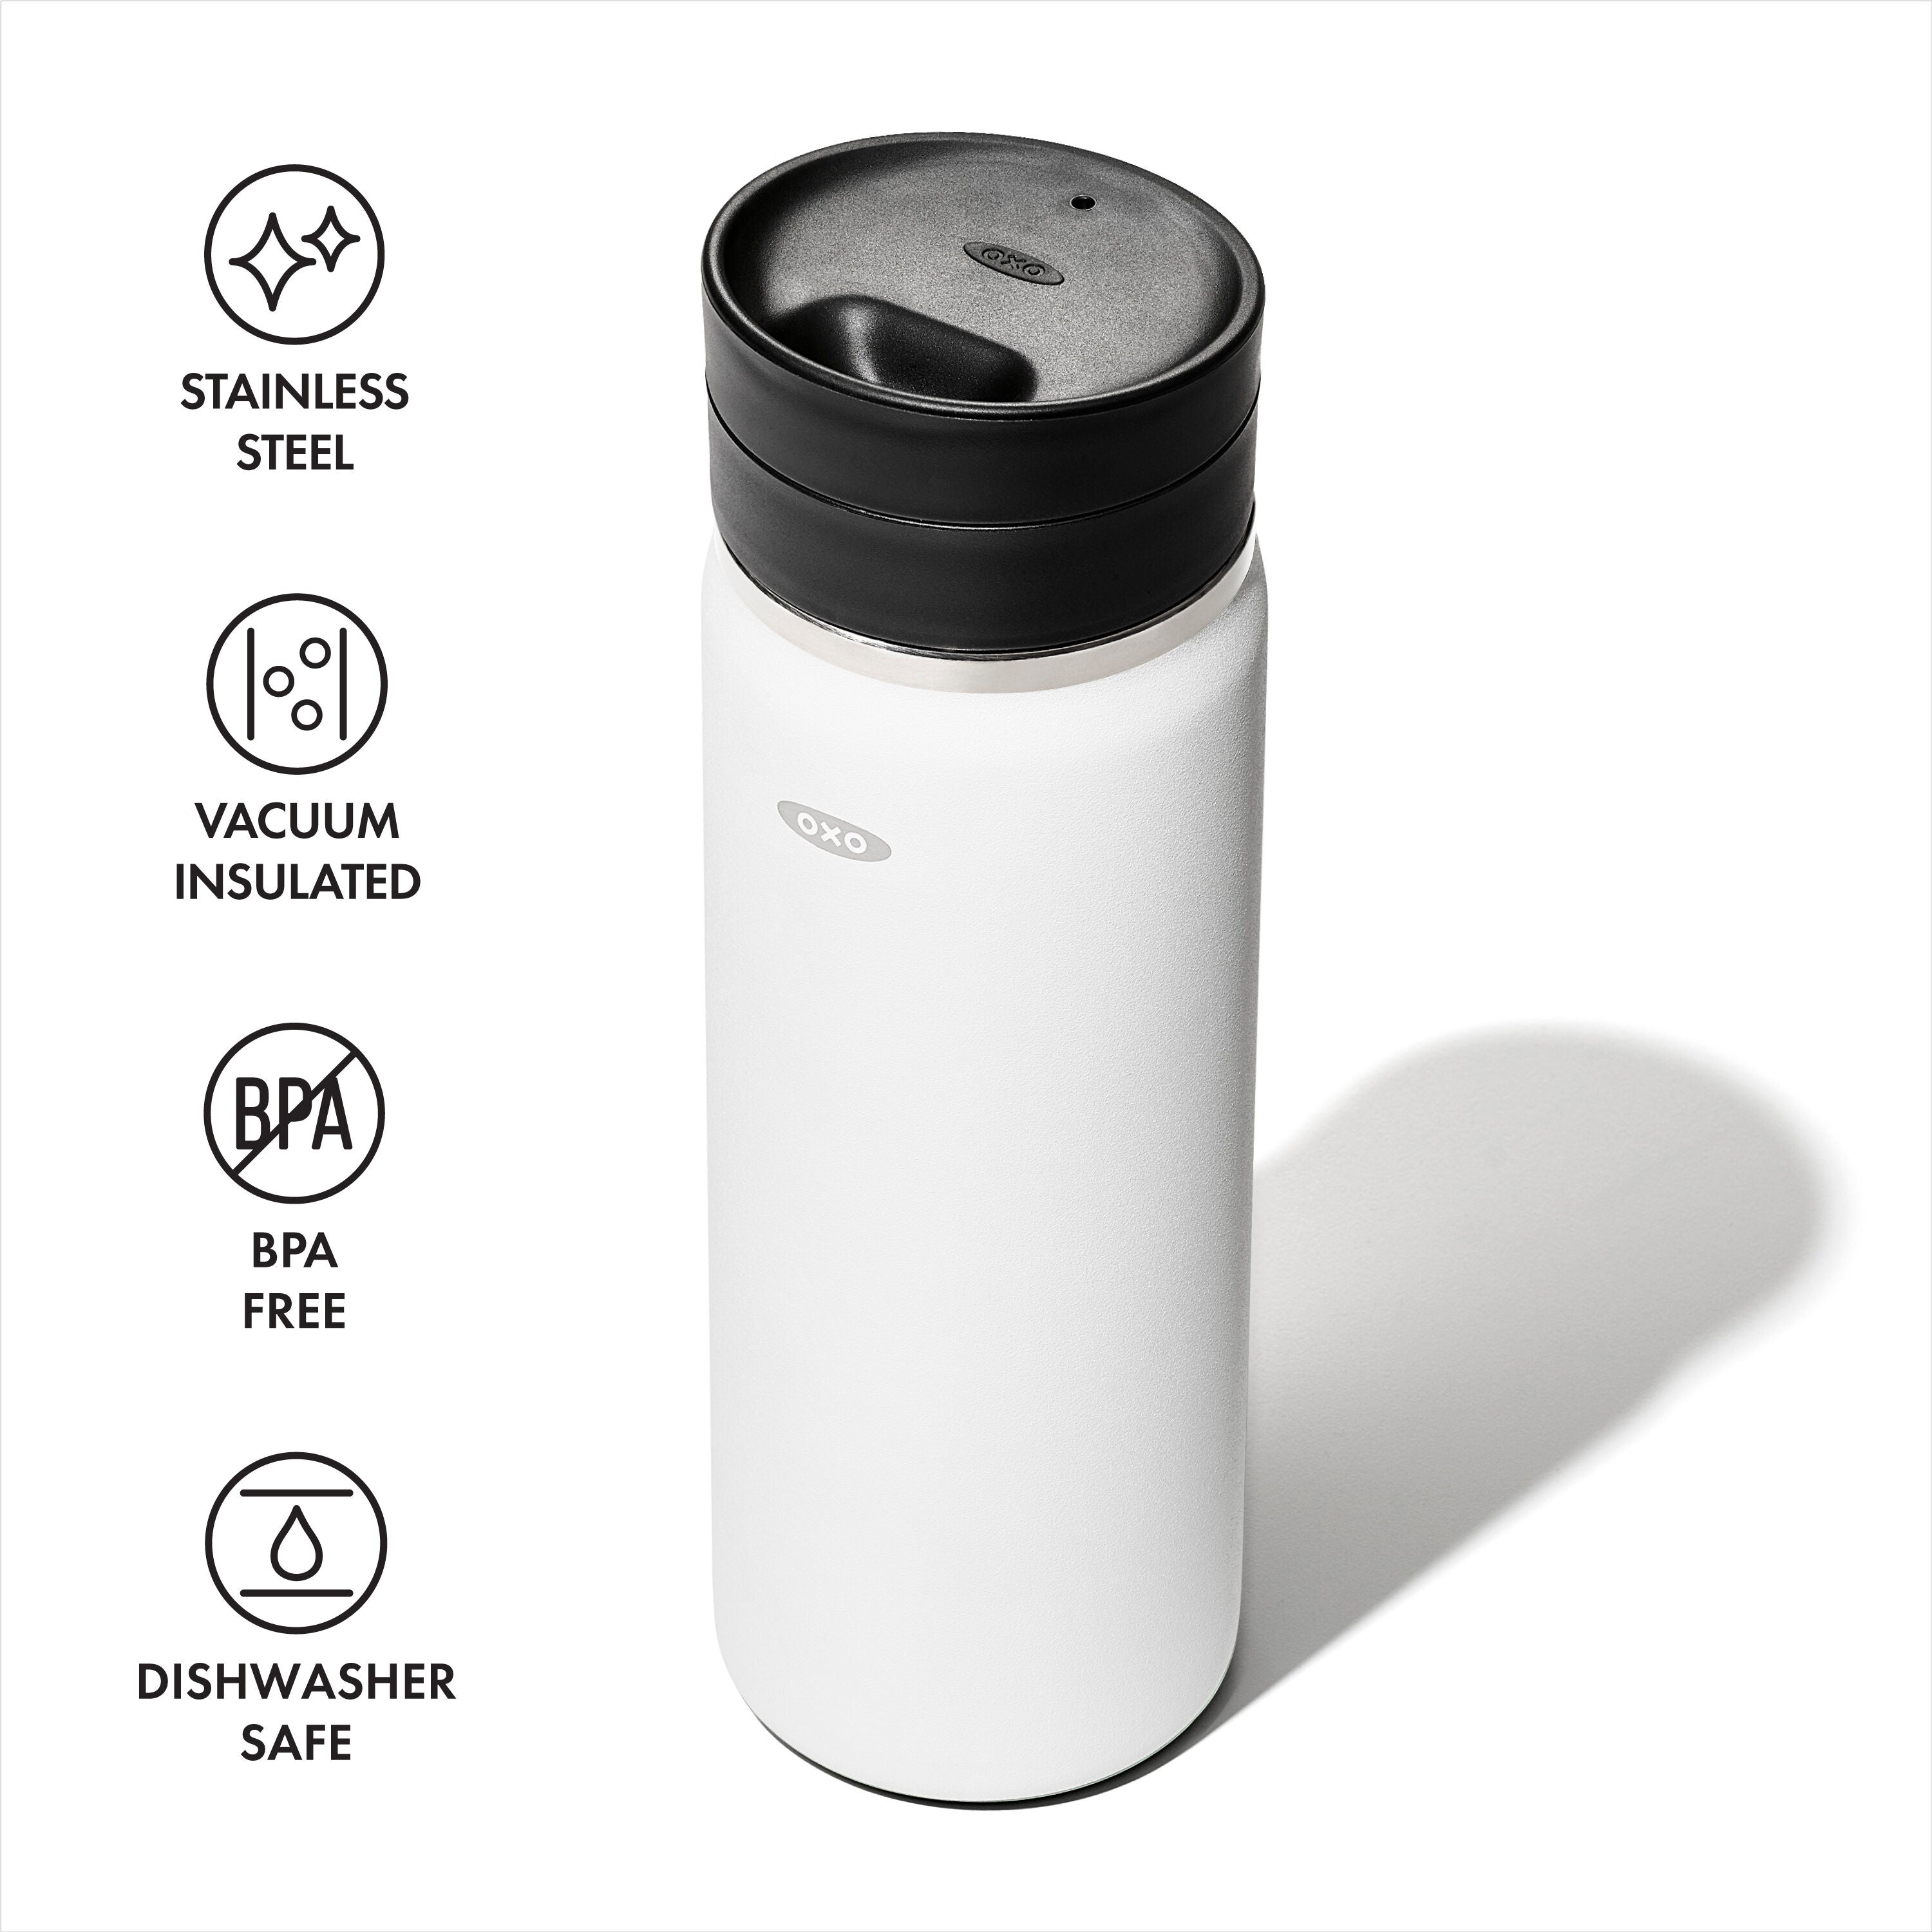 OXO Good Grips 16 oz. Thermal Mug with SimplyClean Lid – White